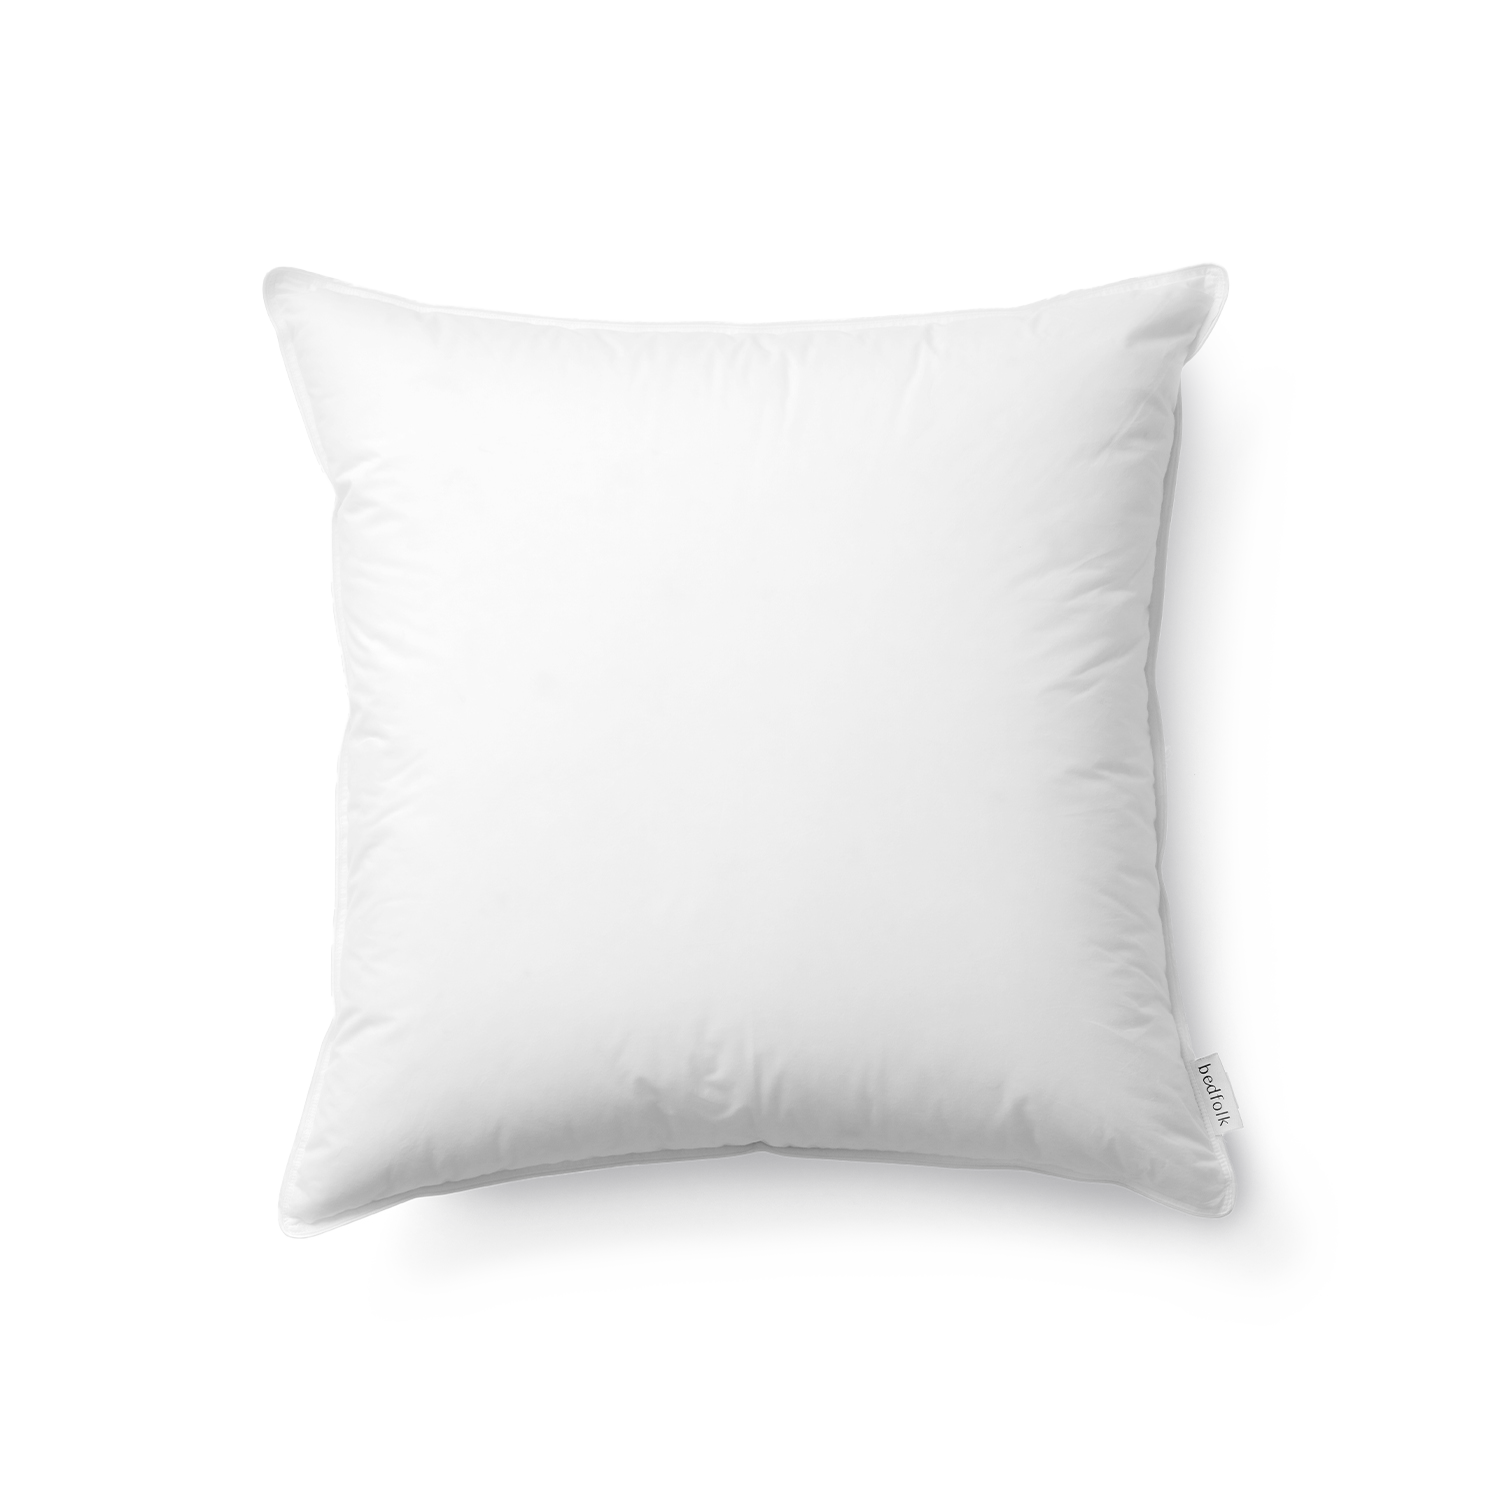 The 100% Down Square Pillow